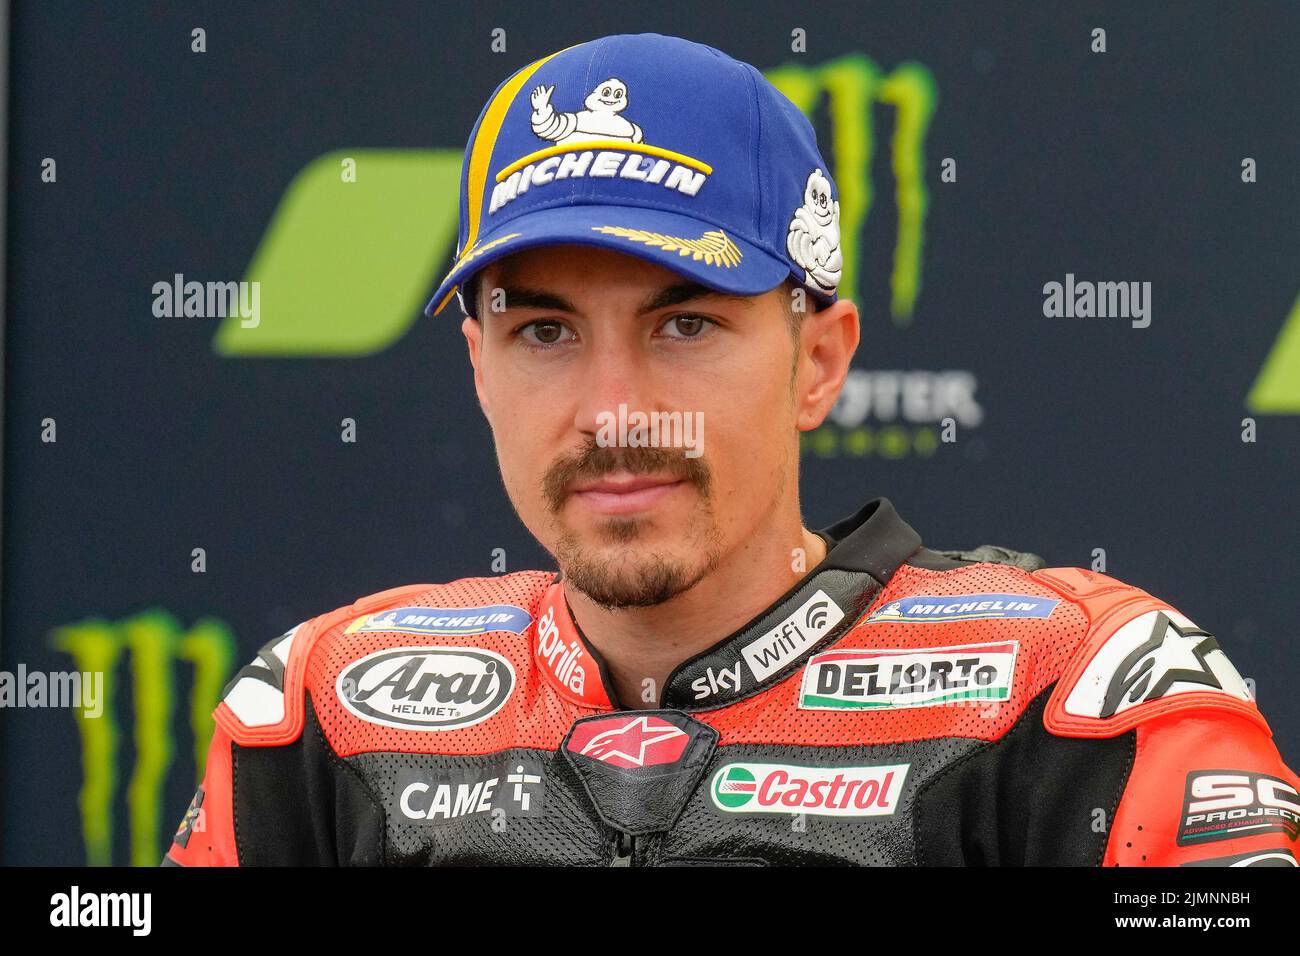 Towcester, UK. 07th Aug, 2022. Maverick VINALES (Spain) of the Aprilia Racing Team in the post race press conference after finishing second in the 2022 Monster Energy Grand Prix Race at Silverstone Circuit, Towcester, England on the 7th August 2022. Photo by David Horn. Credit: PRiME Media Images/Alamy Live News Stock Photo